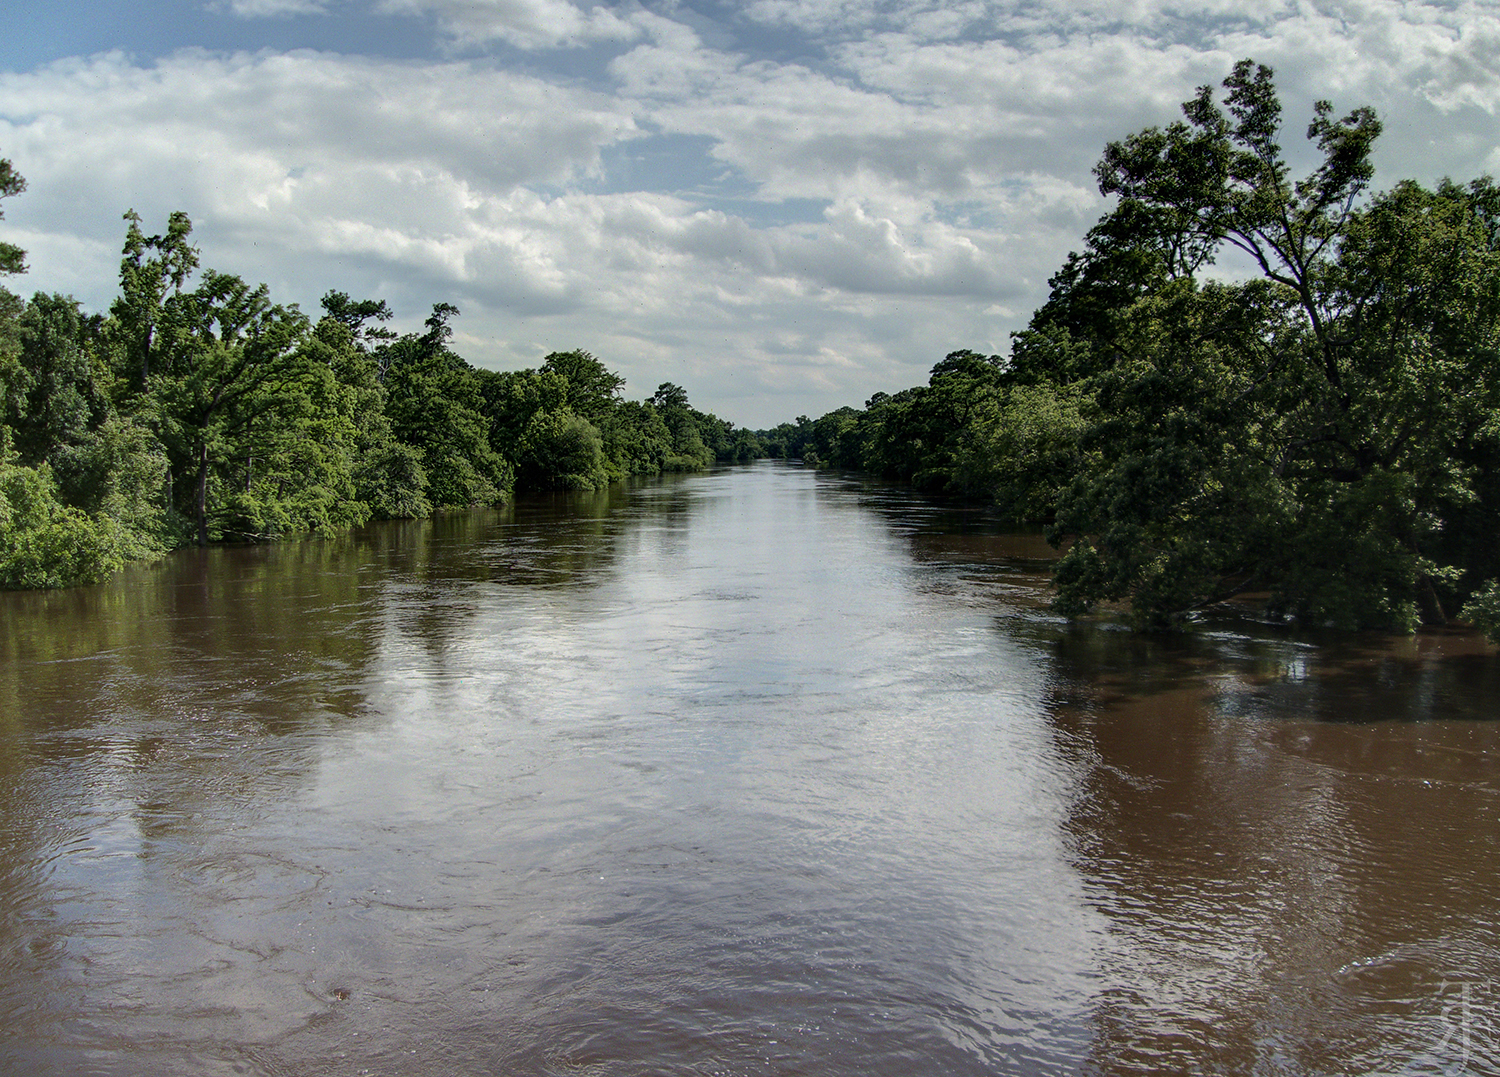 A view of the Neuse River from N.C. Highway 581 in Goldsboro, after heavy rains.